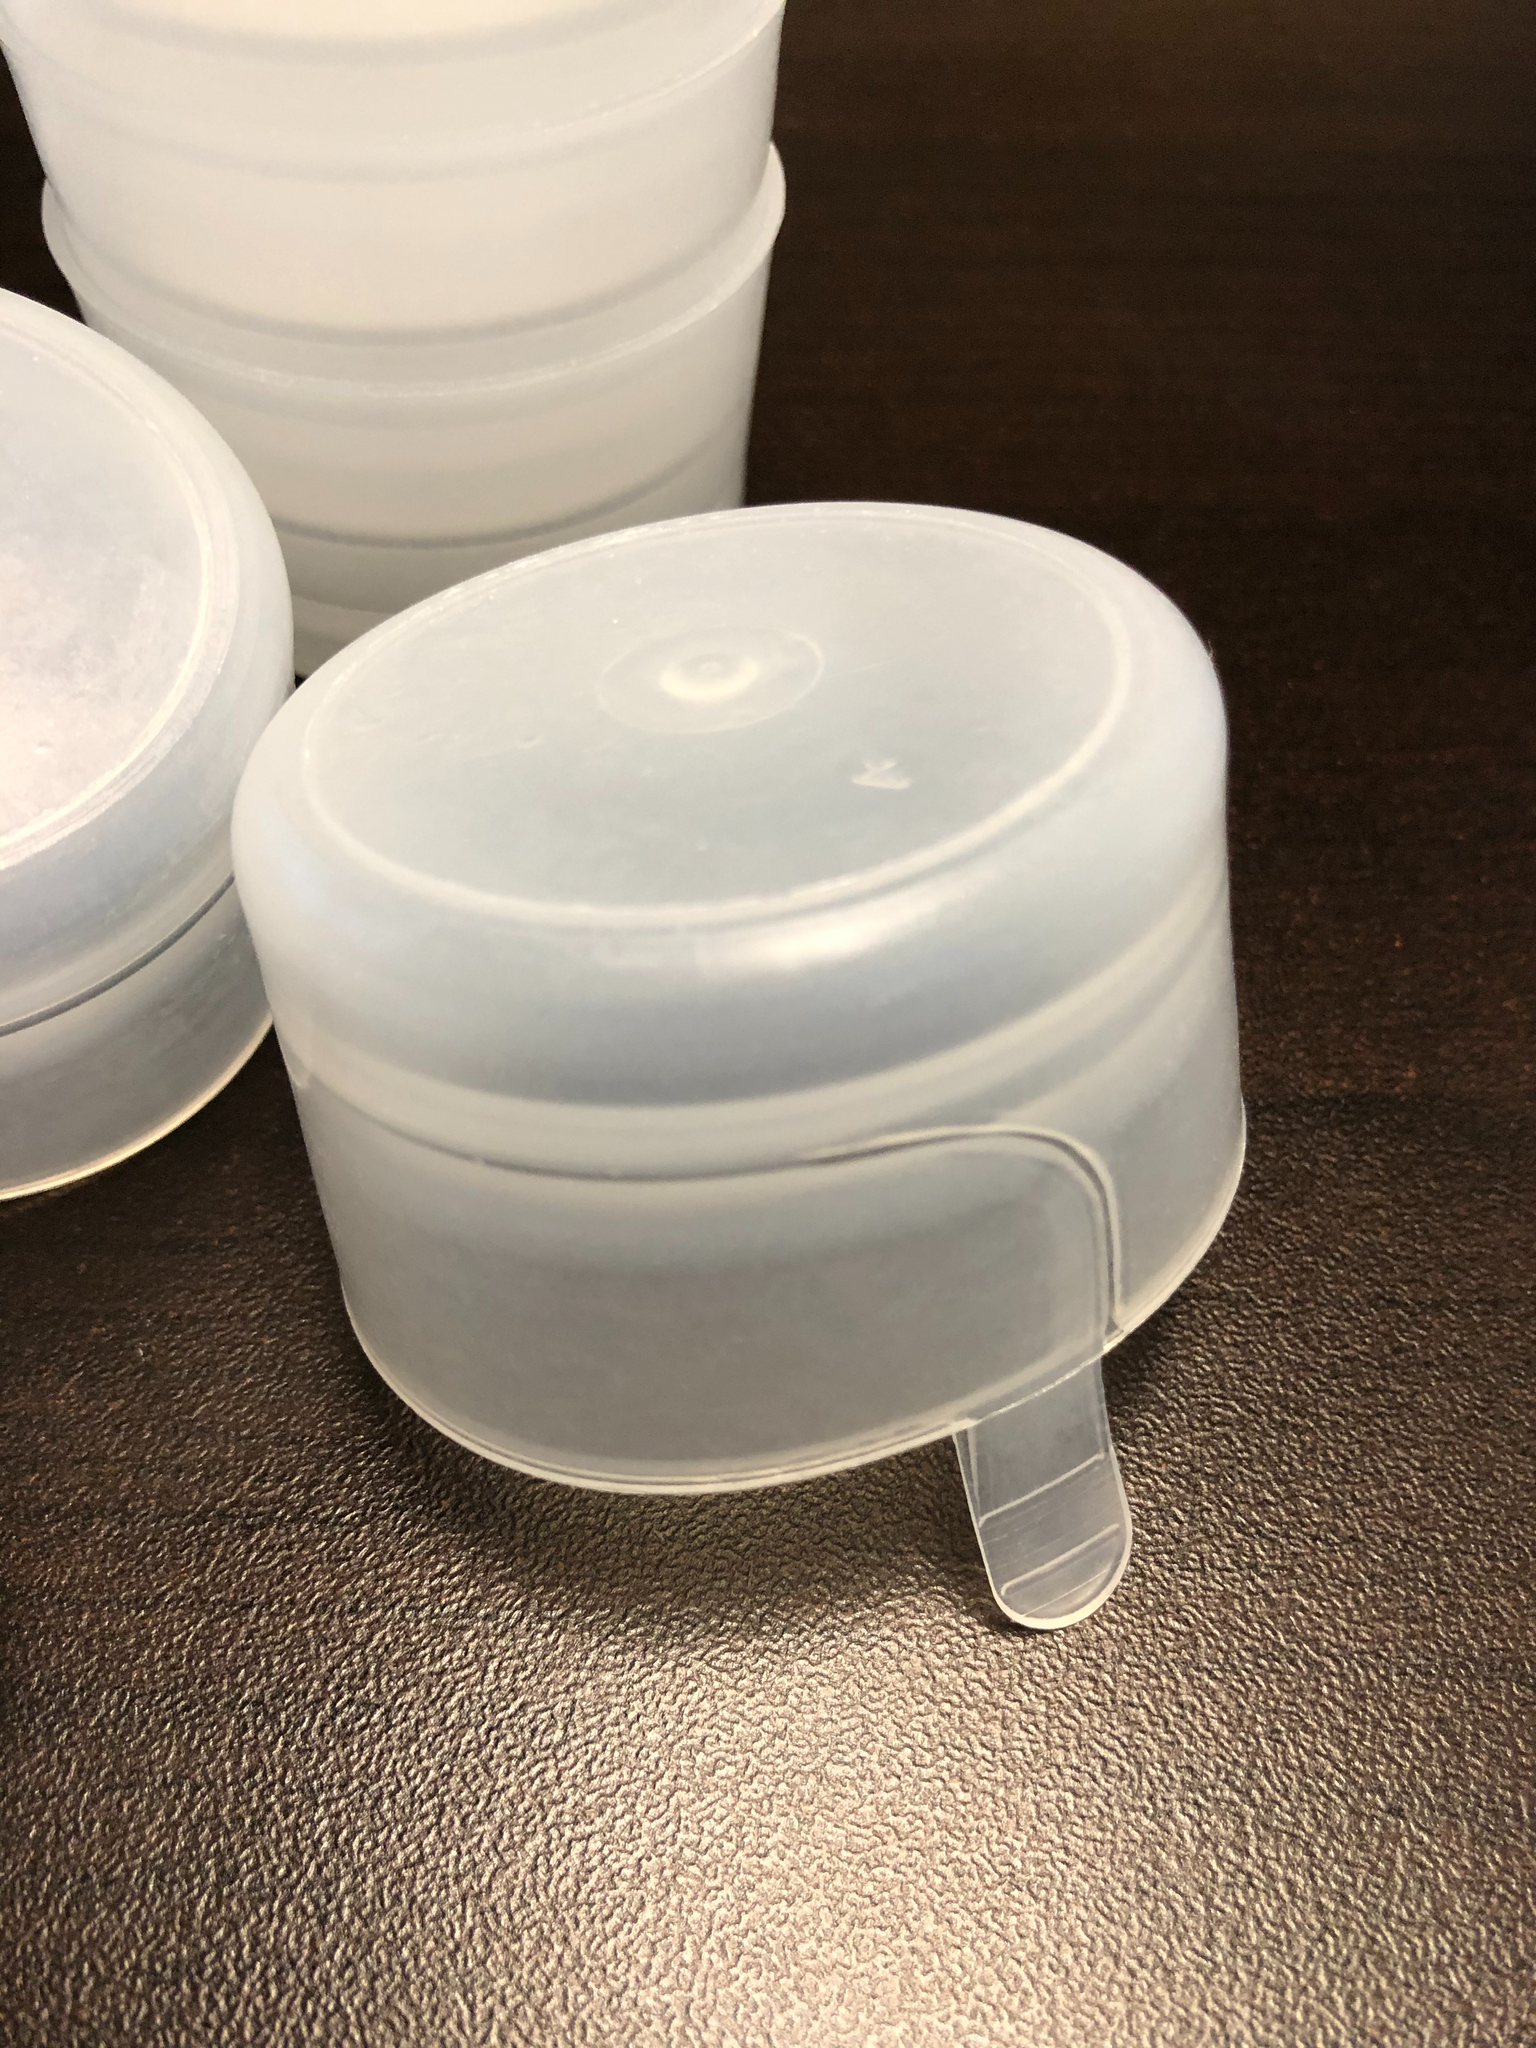 5 Reusable Water Bottle Snap On Cap For 3 And 5 Gallon Jugs Lid